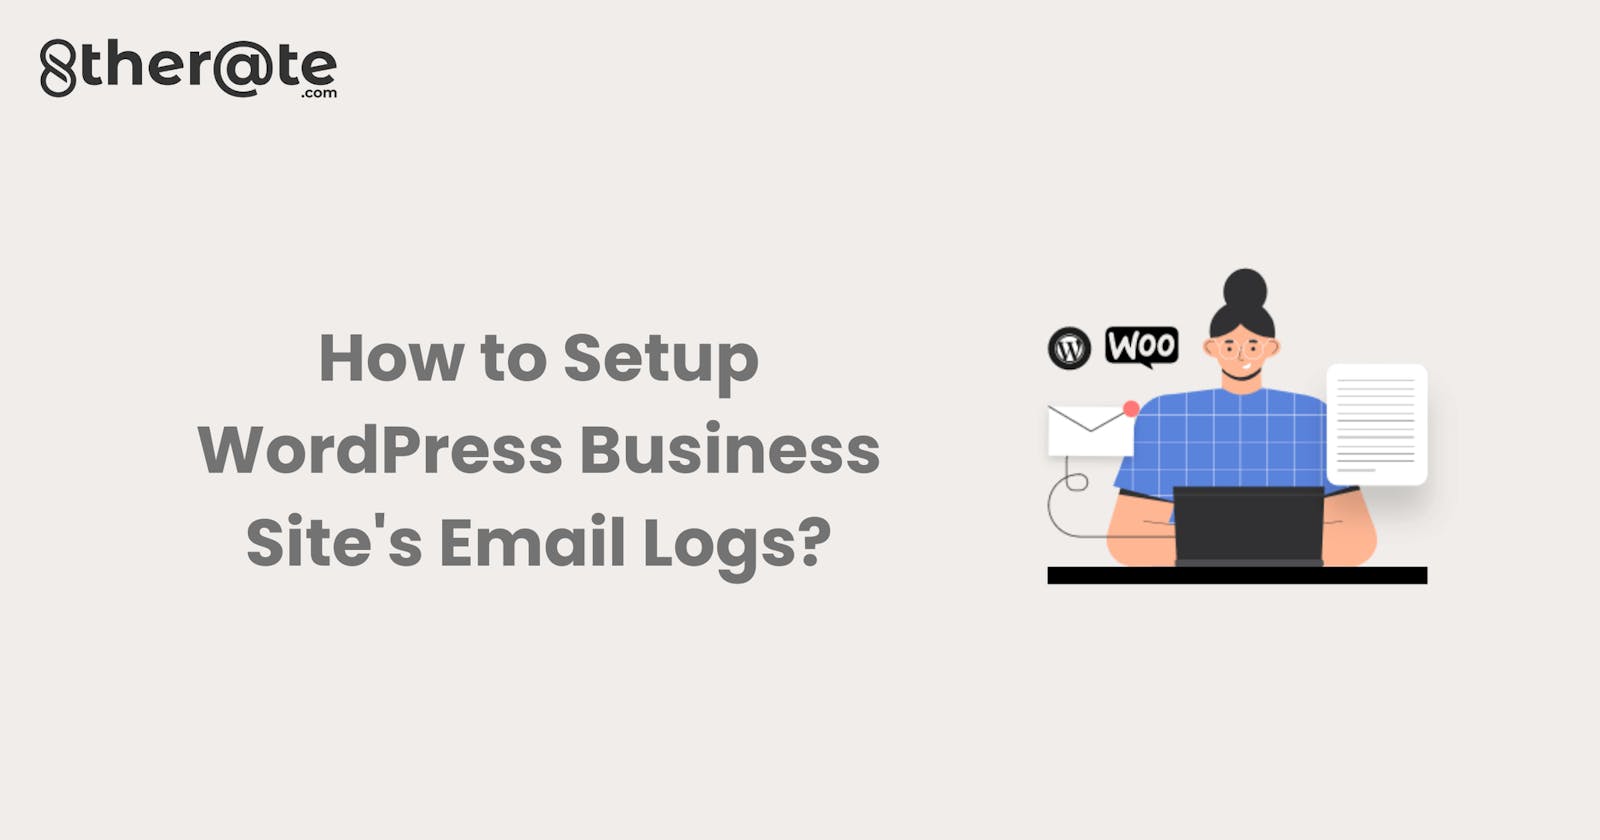 How to Setup WordPress Business Site's Email Logs?